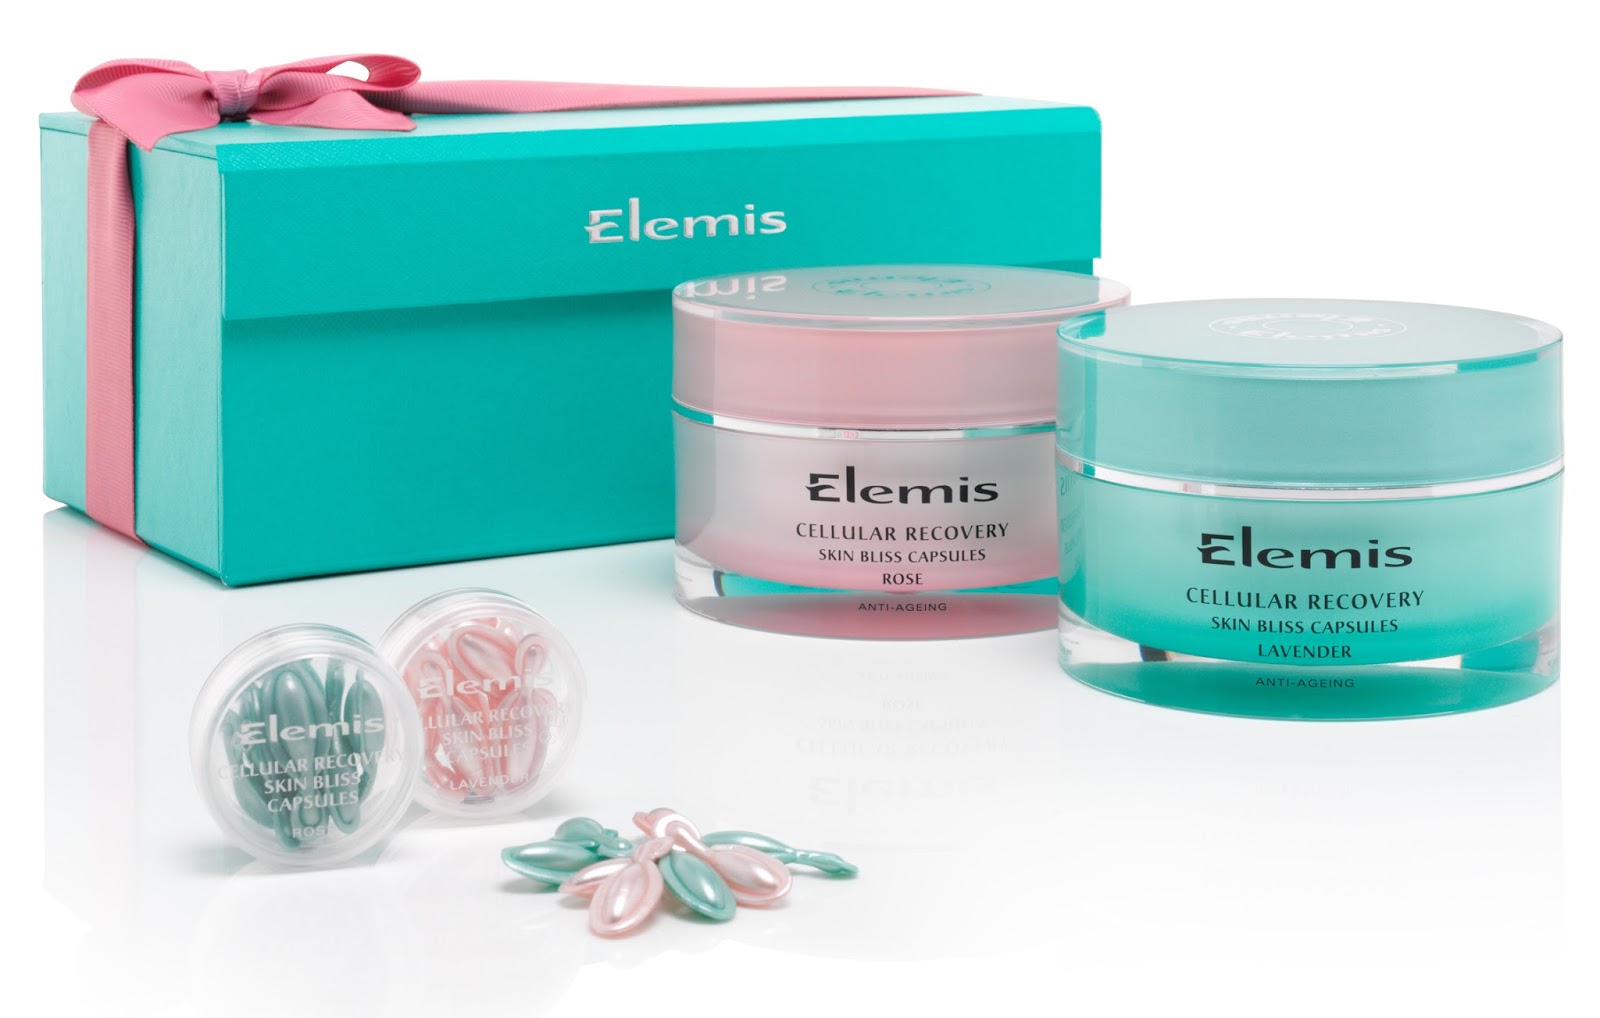 Elemis Cellular Recovery Skin Bliss Capsules Limited Edition Collection